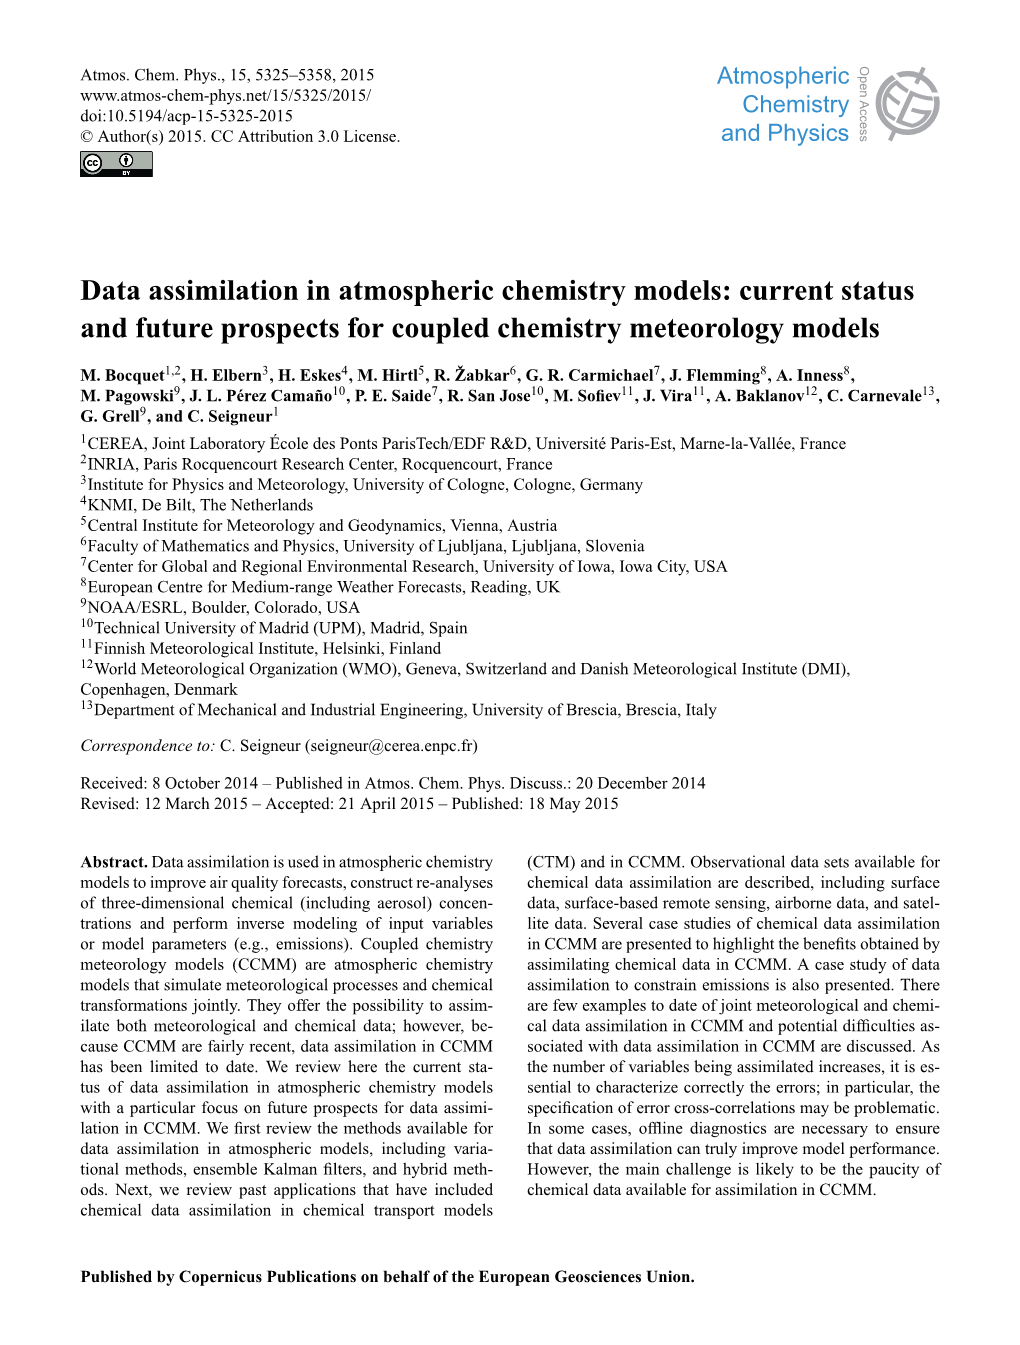 Data Assimilation in Atmospheric Chemistry Models: Current Status and Future Prospects for Coupled Chemistry Meteorology Models